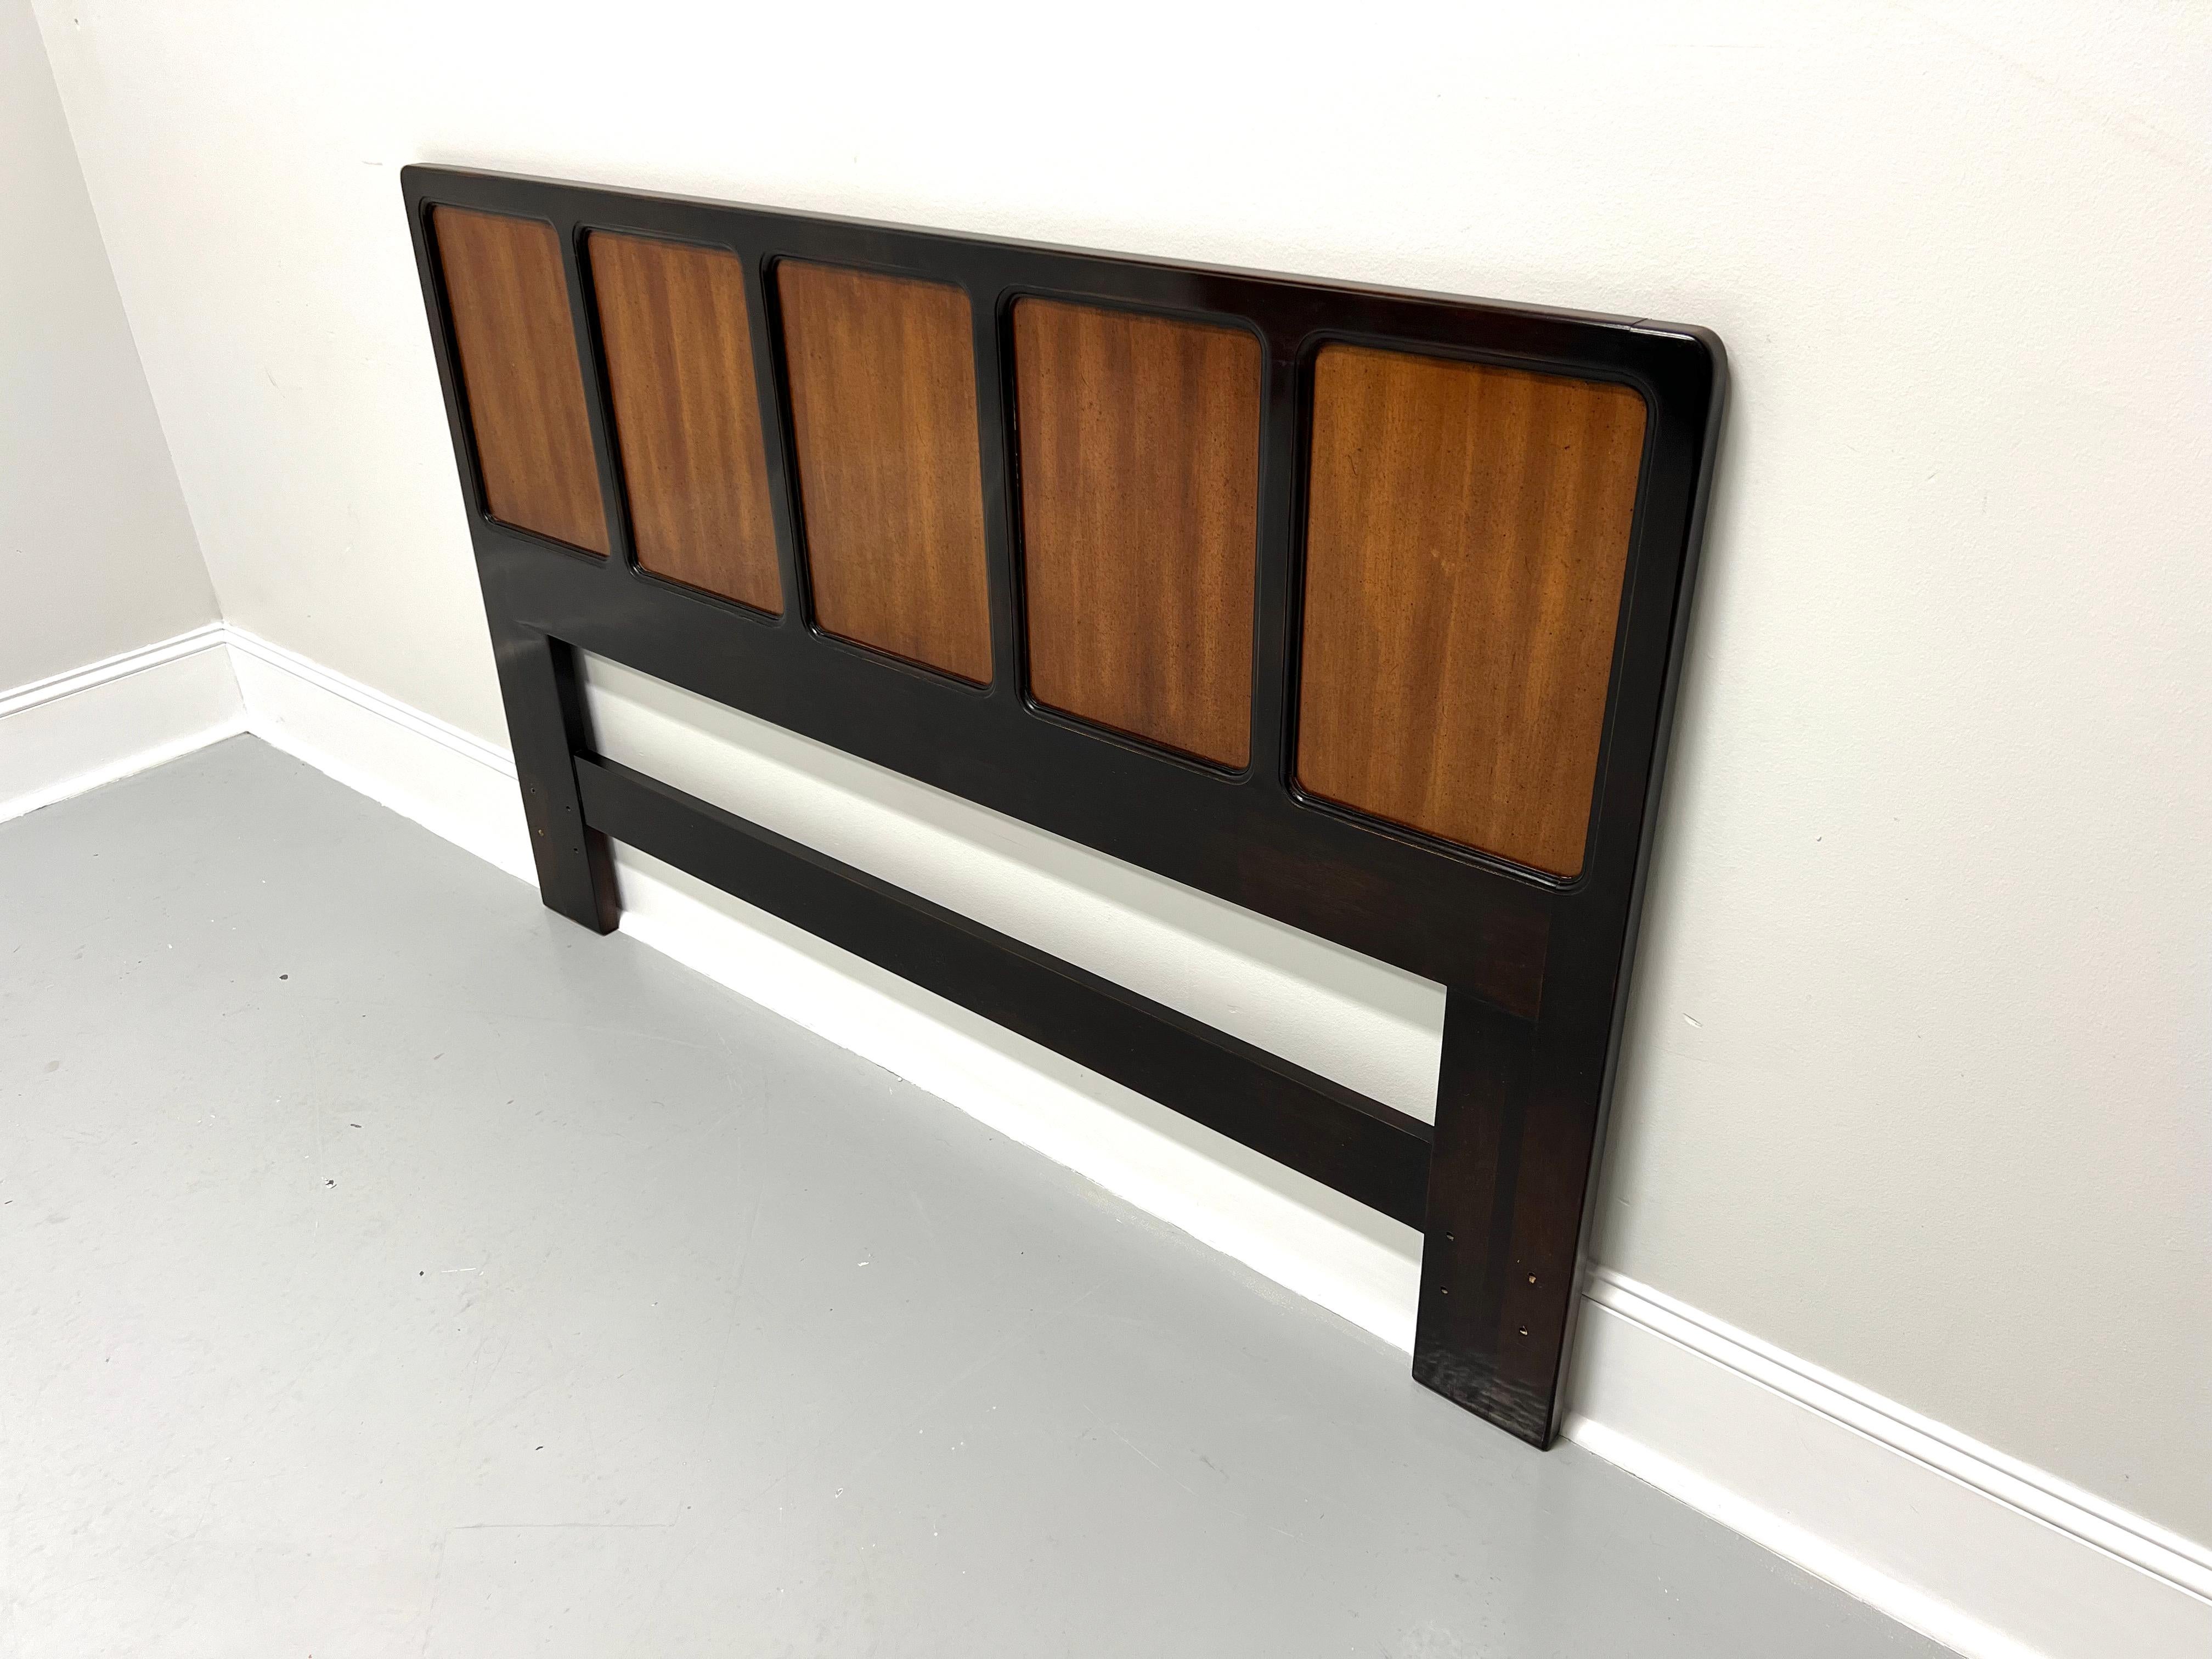 An Asian inspired queen size headboard designed by Michael Taylor for Henredon. Mahogany with a slightly distressed finish forming five panels framed in black lacquer. Made in Morganton, North Carolina, USA, circa 1982.

Style #:  9900-10

Measures: